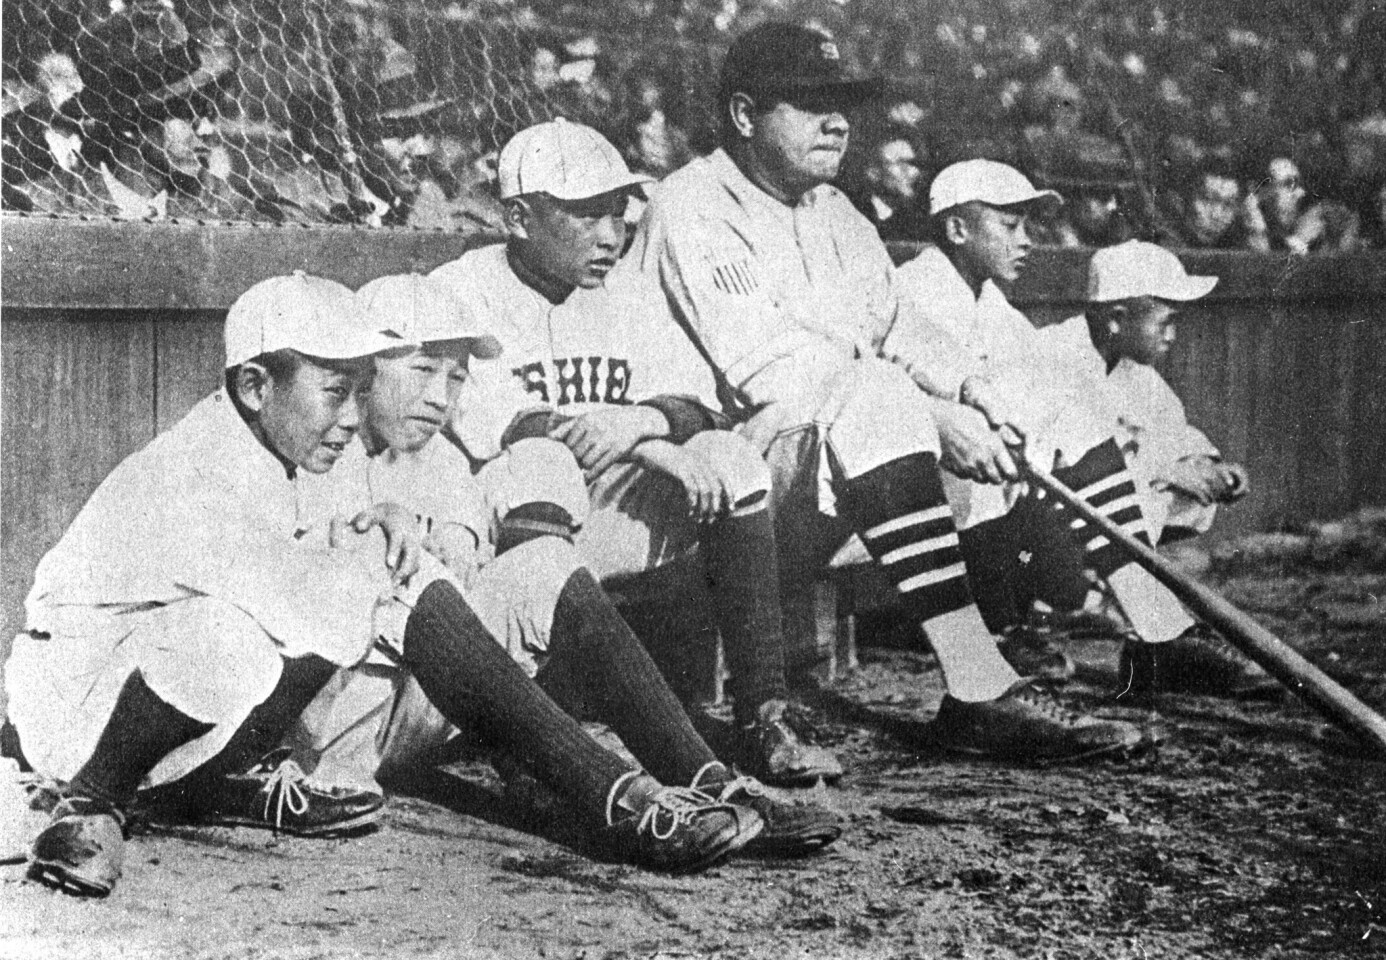 TOKYO - 1934. During the 1934 tour of Japan, Babe Ruth poses for a photo with young Japanese players. (Photo by Mark Rucker/Transcendental Graphics, Getty Images)